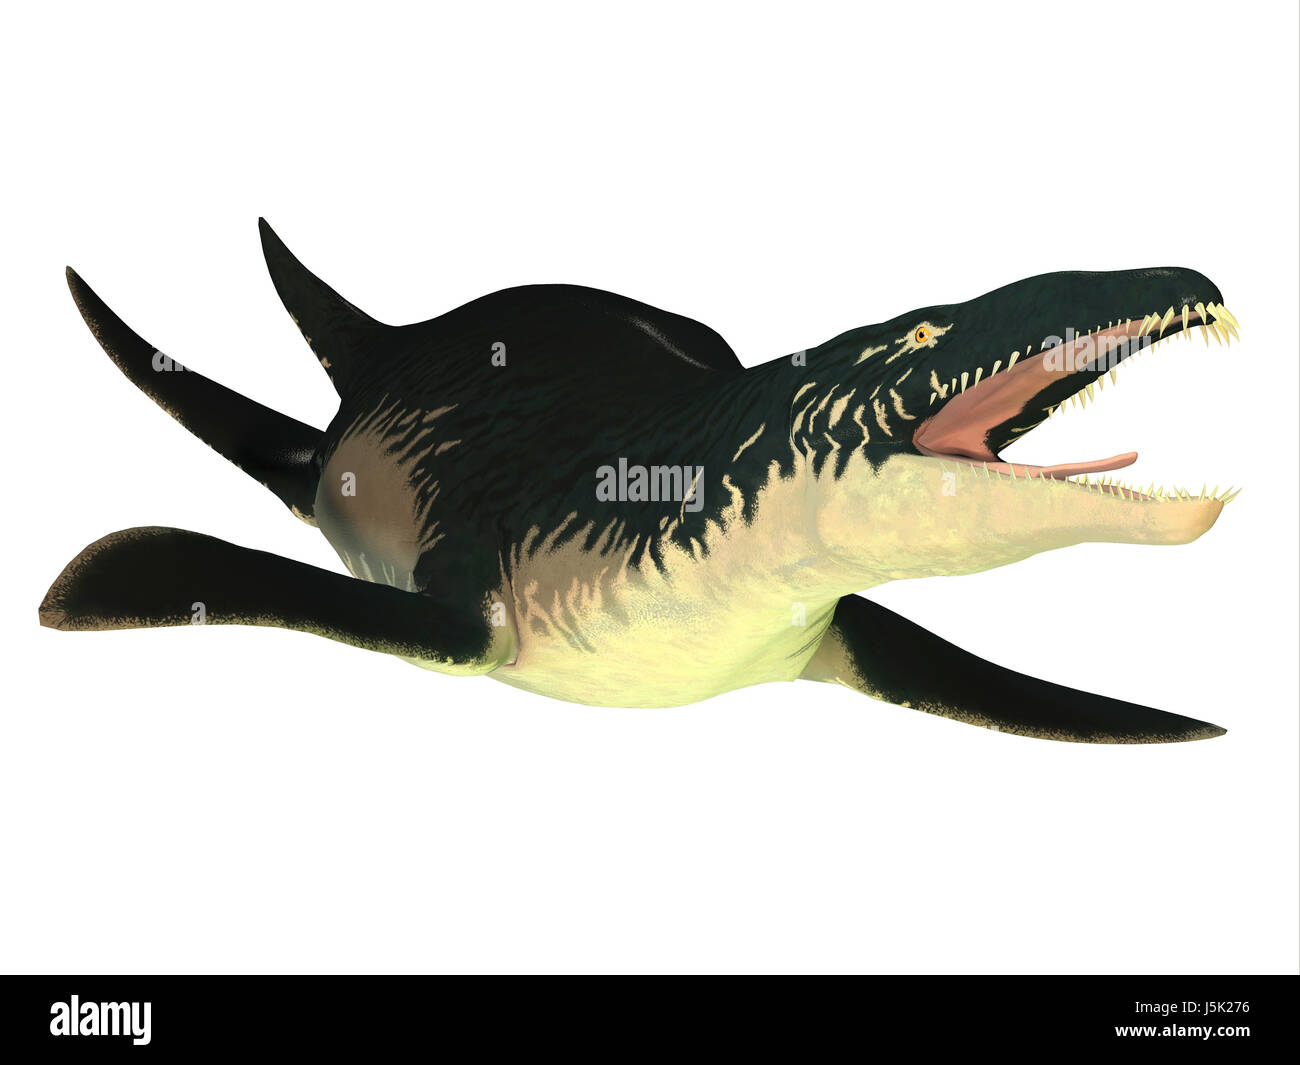 Liopleurodon was a carnivorous marine reptile that lived in Jurassic seas of France and England. Stock Photo